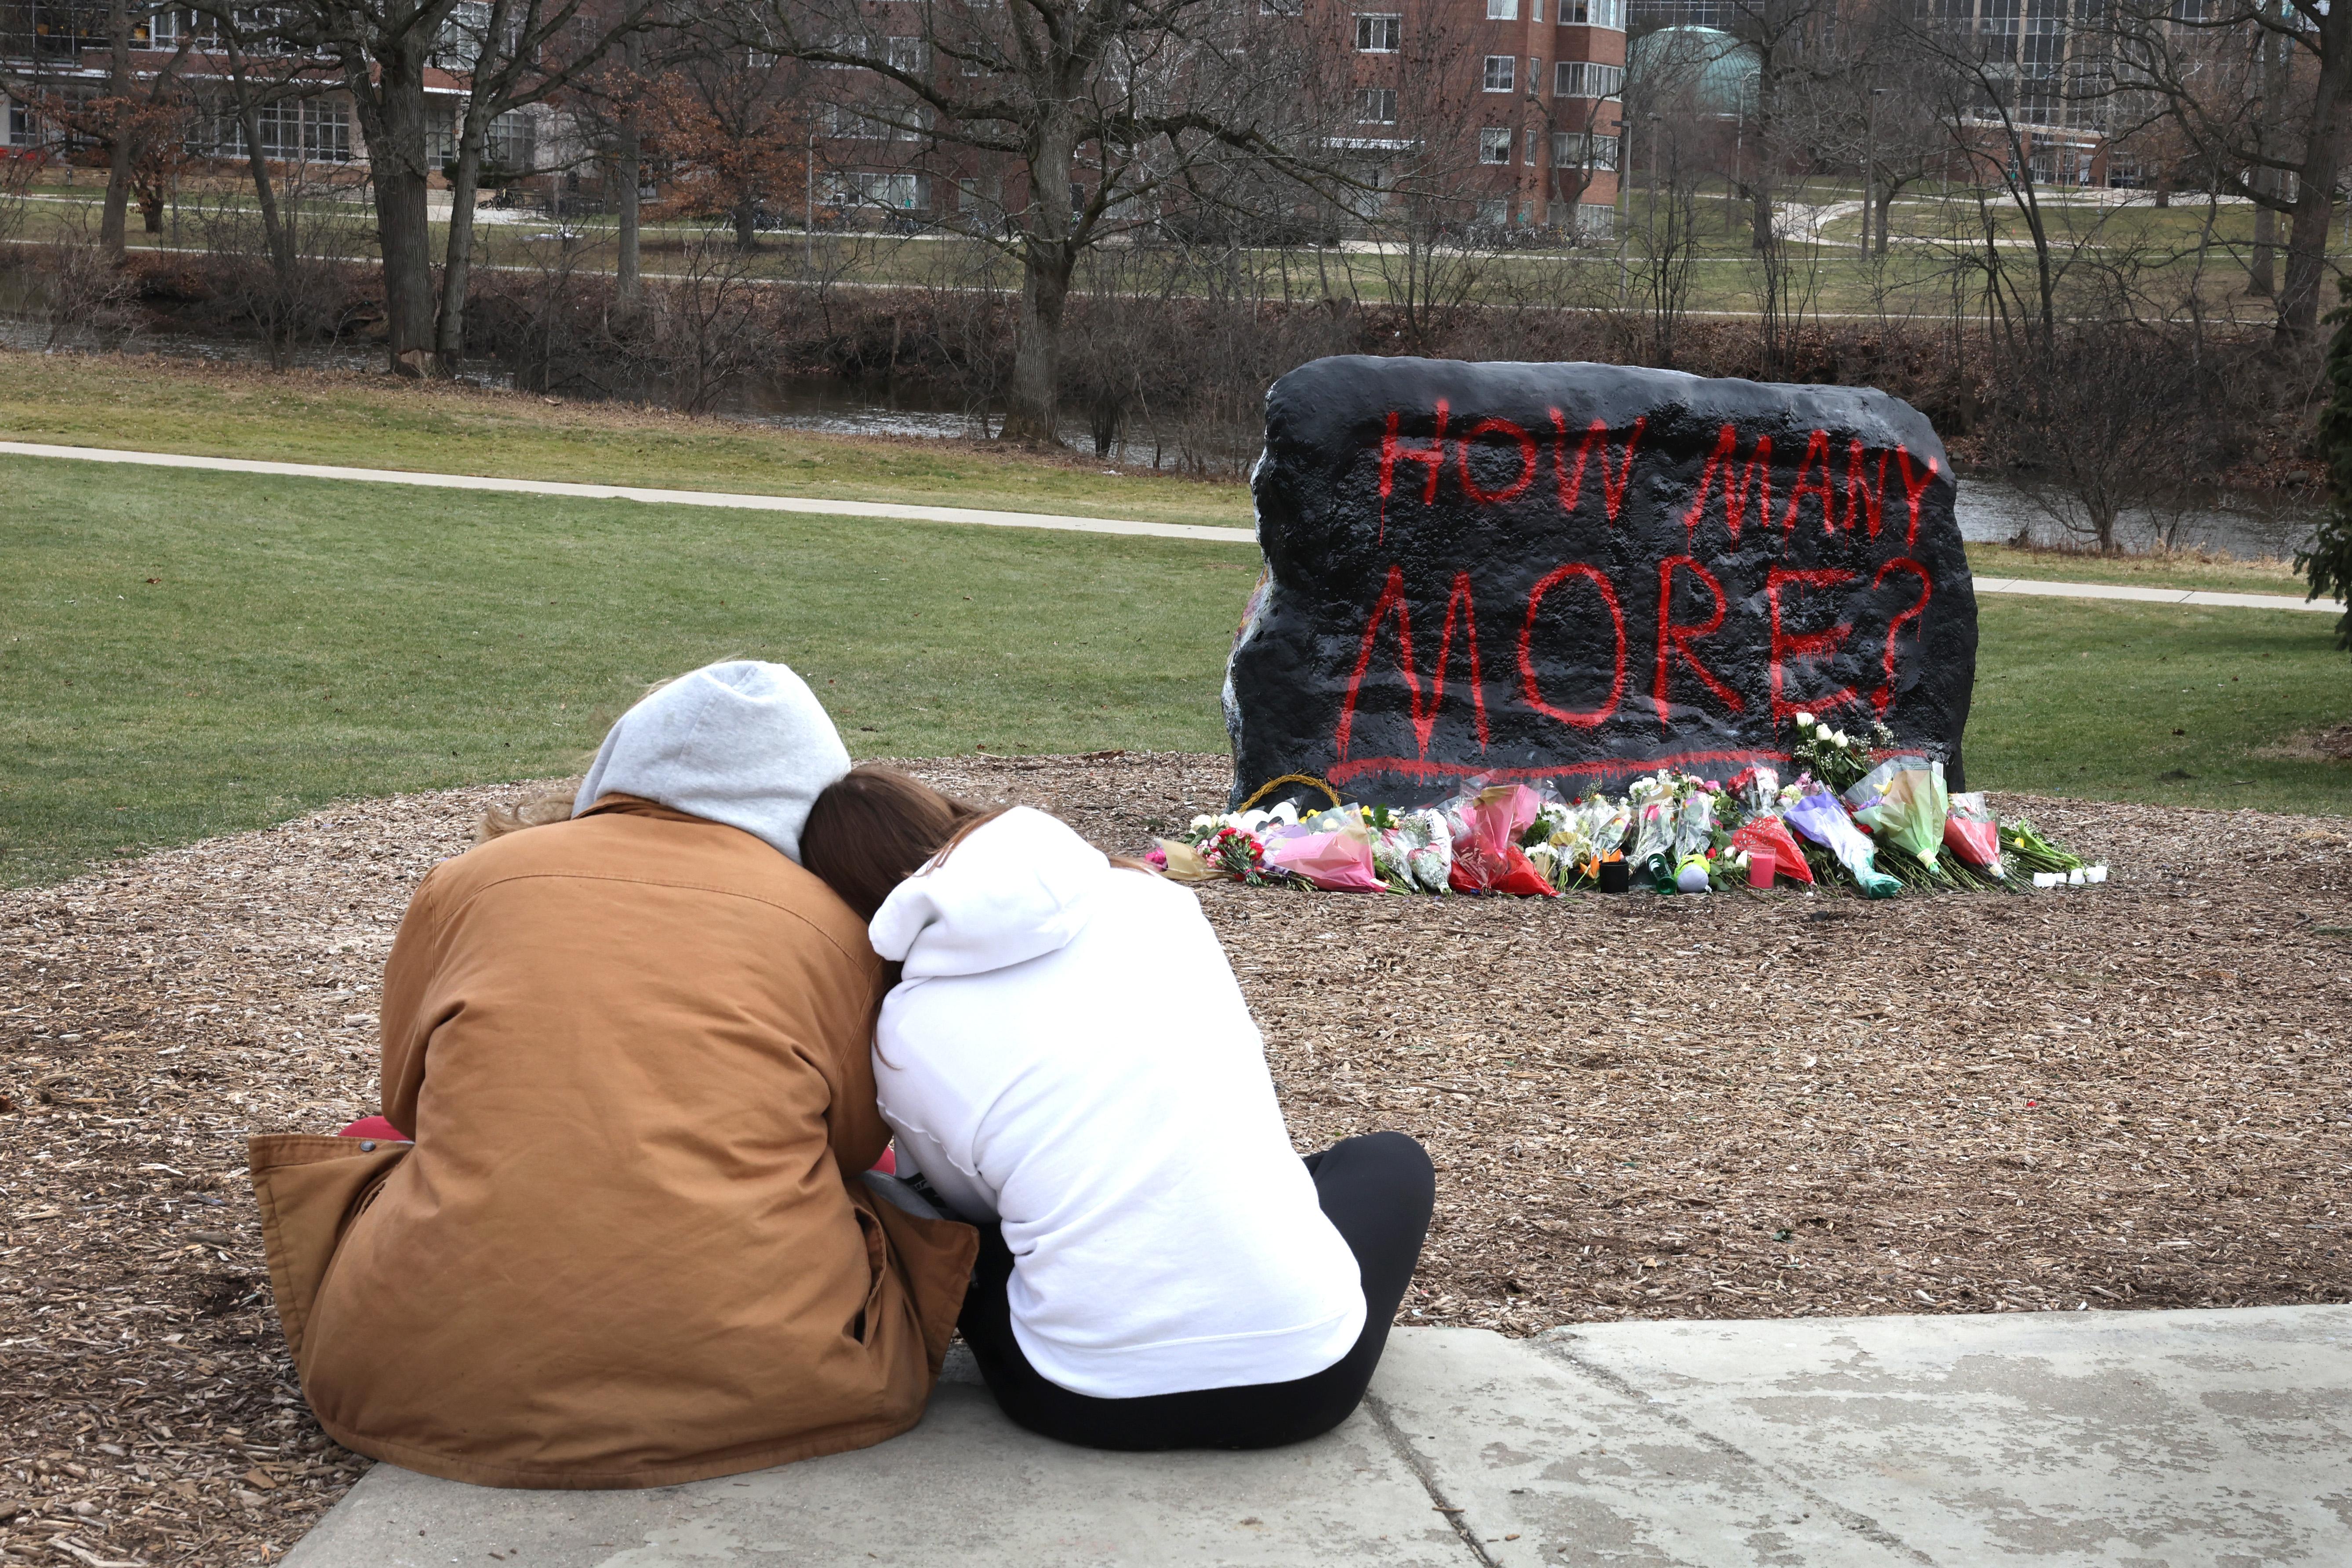 Two people, backs turned to the camera, huddle close to each in front of a rock on which the words "How Many More?" are painted.